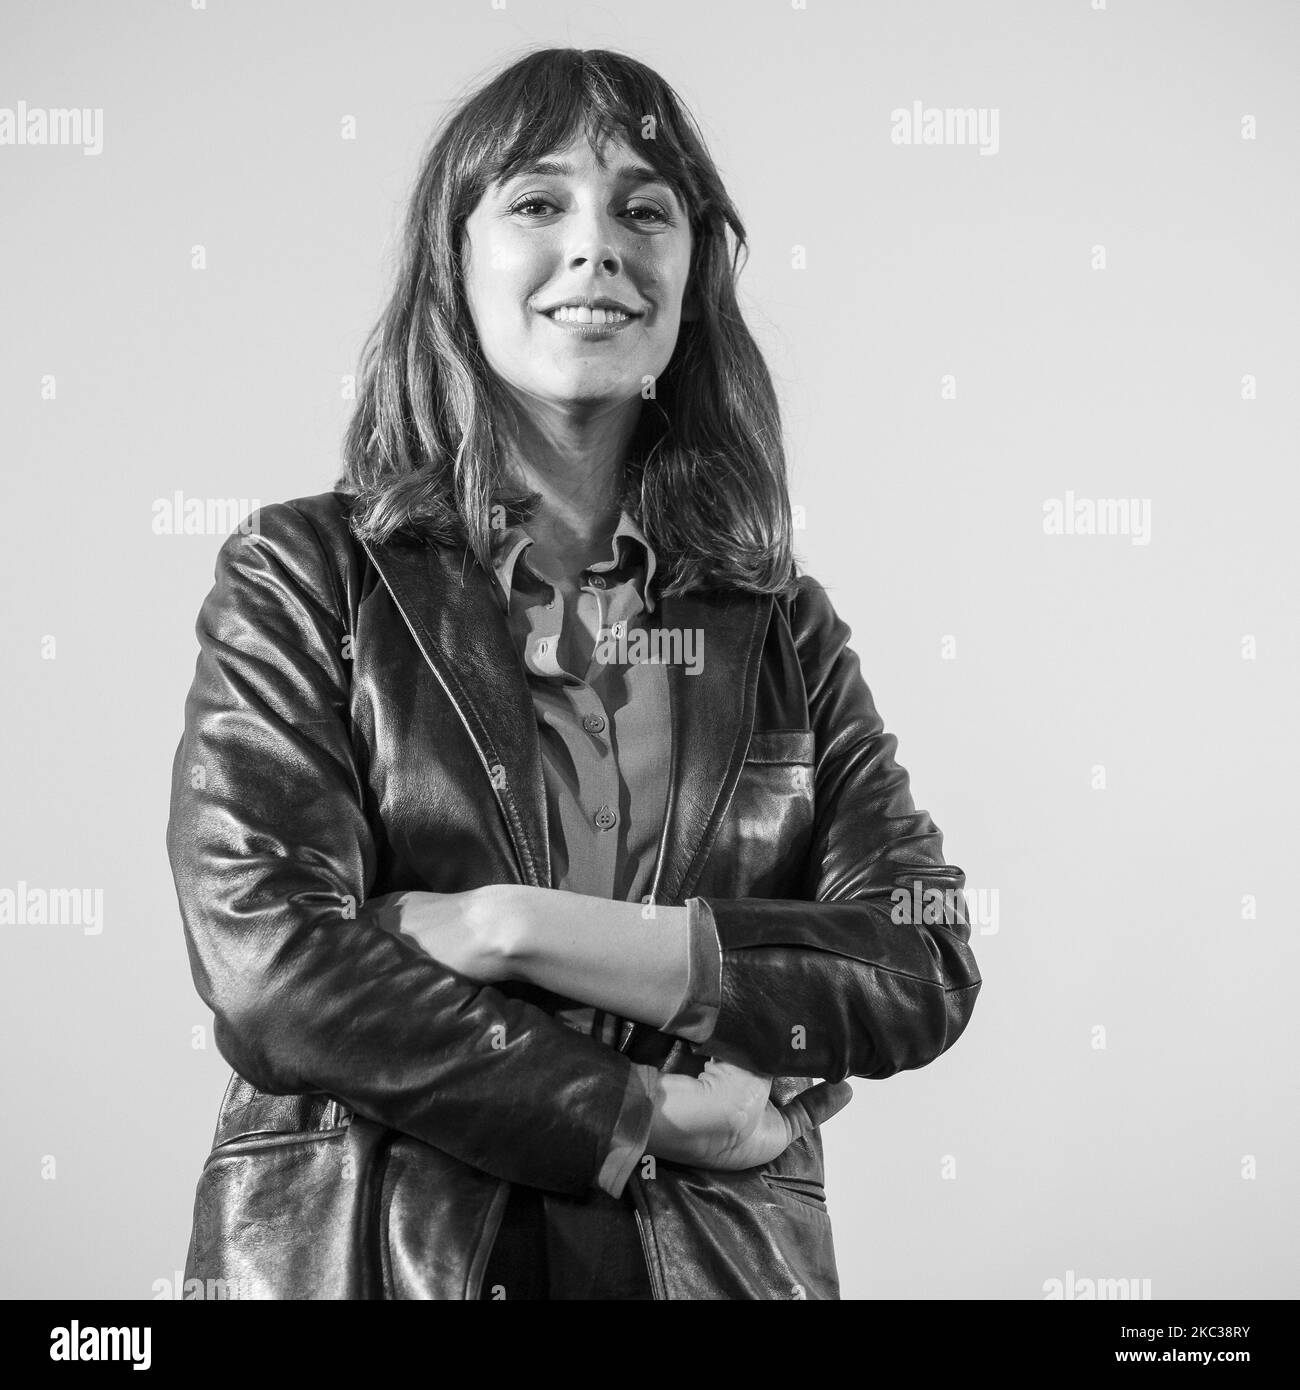 (EDITOR'S NOTE: Image has been converted to black and white) Actress Belen Cuesta attends the announcement of the Spanish film 'La Trinchera Infinita' as a Spanish film candidate for the Oscars on November 03, 2020 in Madrid, Spain (Photo by Oscar Gonzalez/NurPhoto) Stock Photo